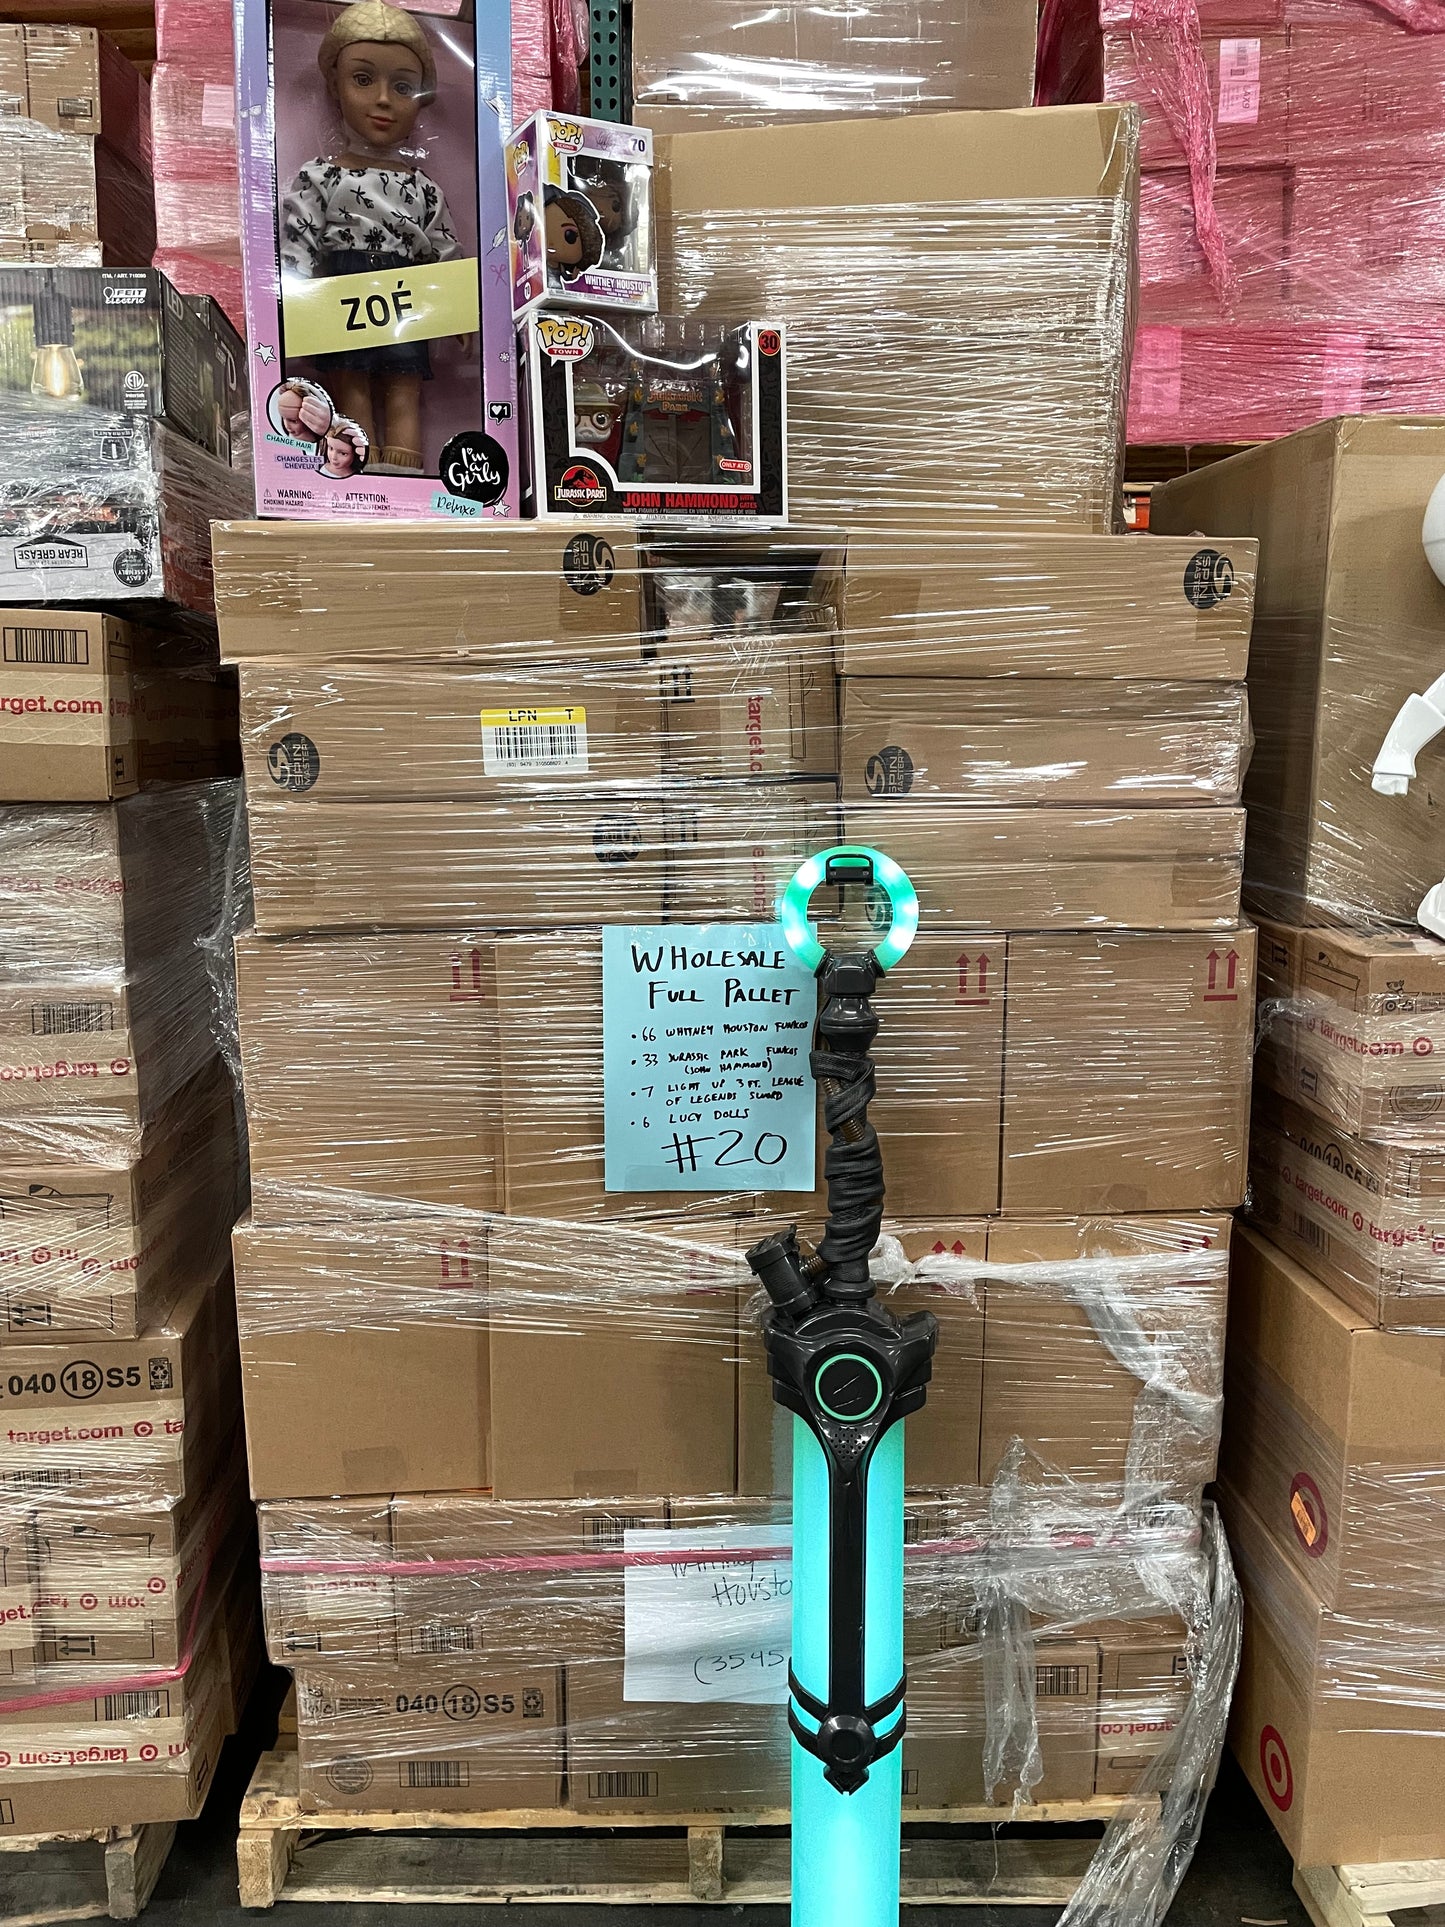 LOT #20 Wholesale Pallet of Mix of Toys.  Funko Pop, League of Legends Swords, Im a Girly Dolls (Retail $3300)) Pickup Only!